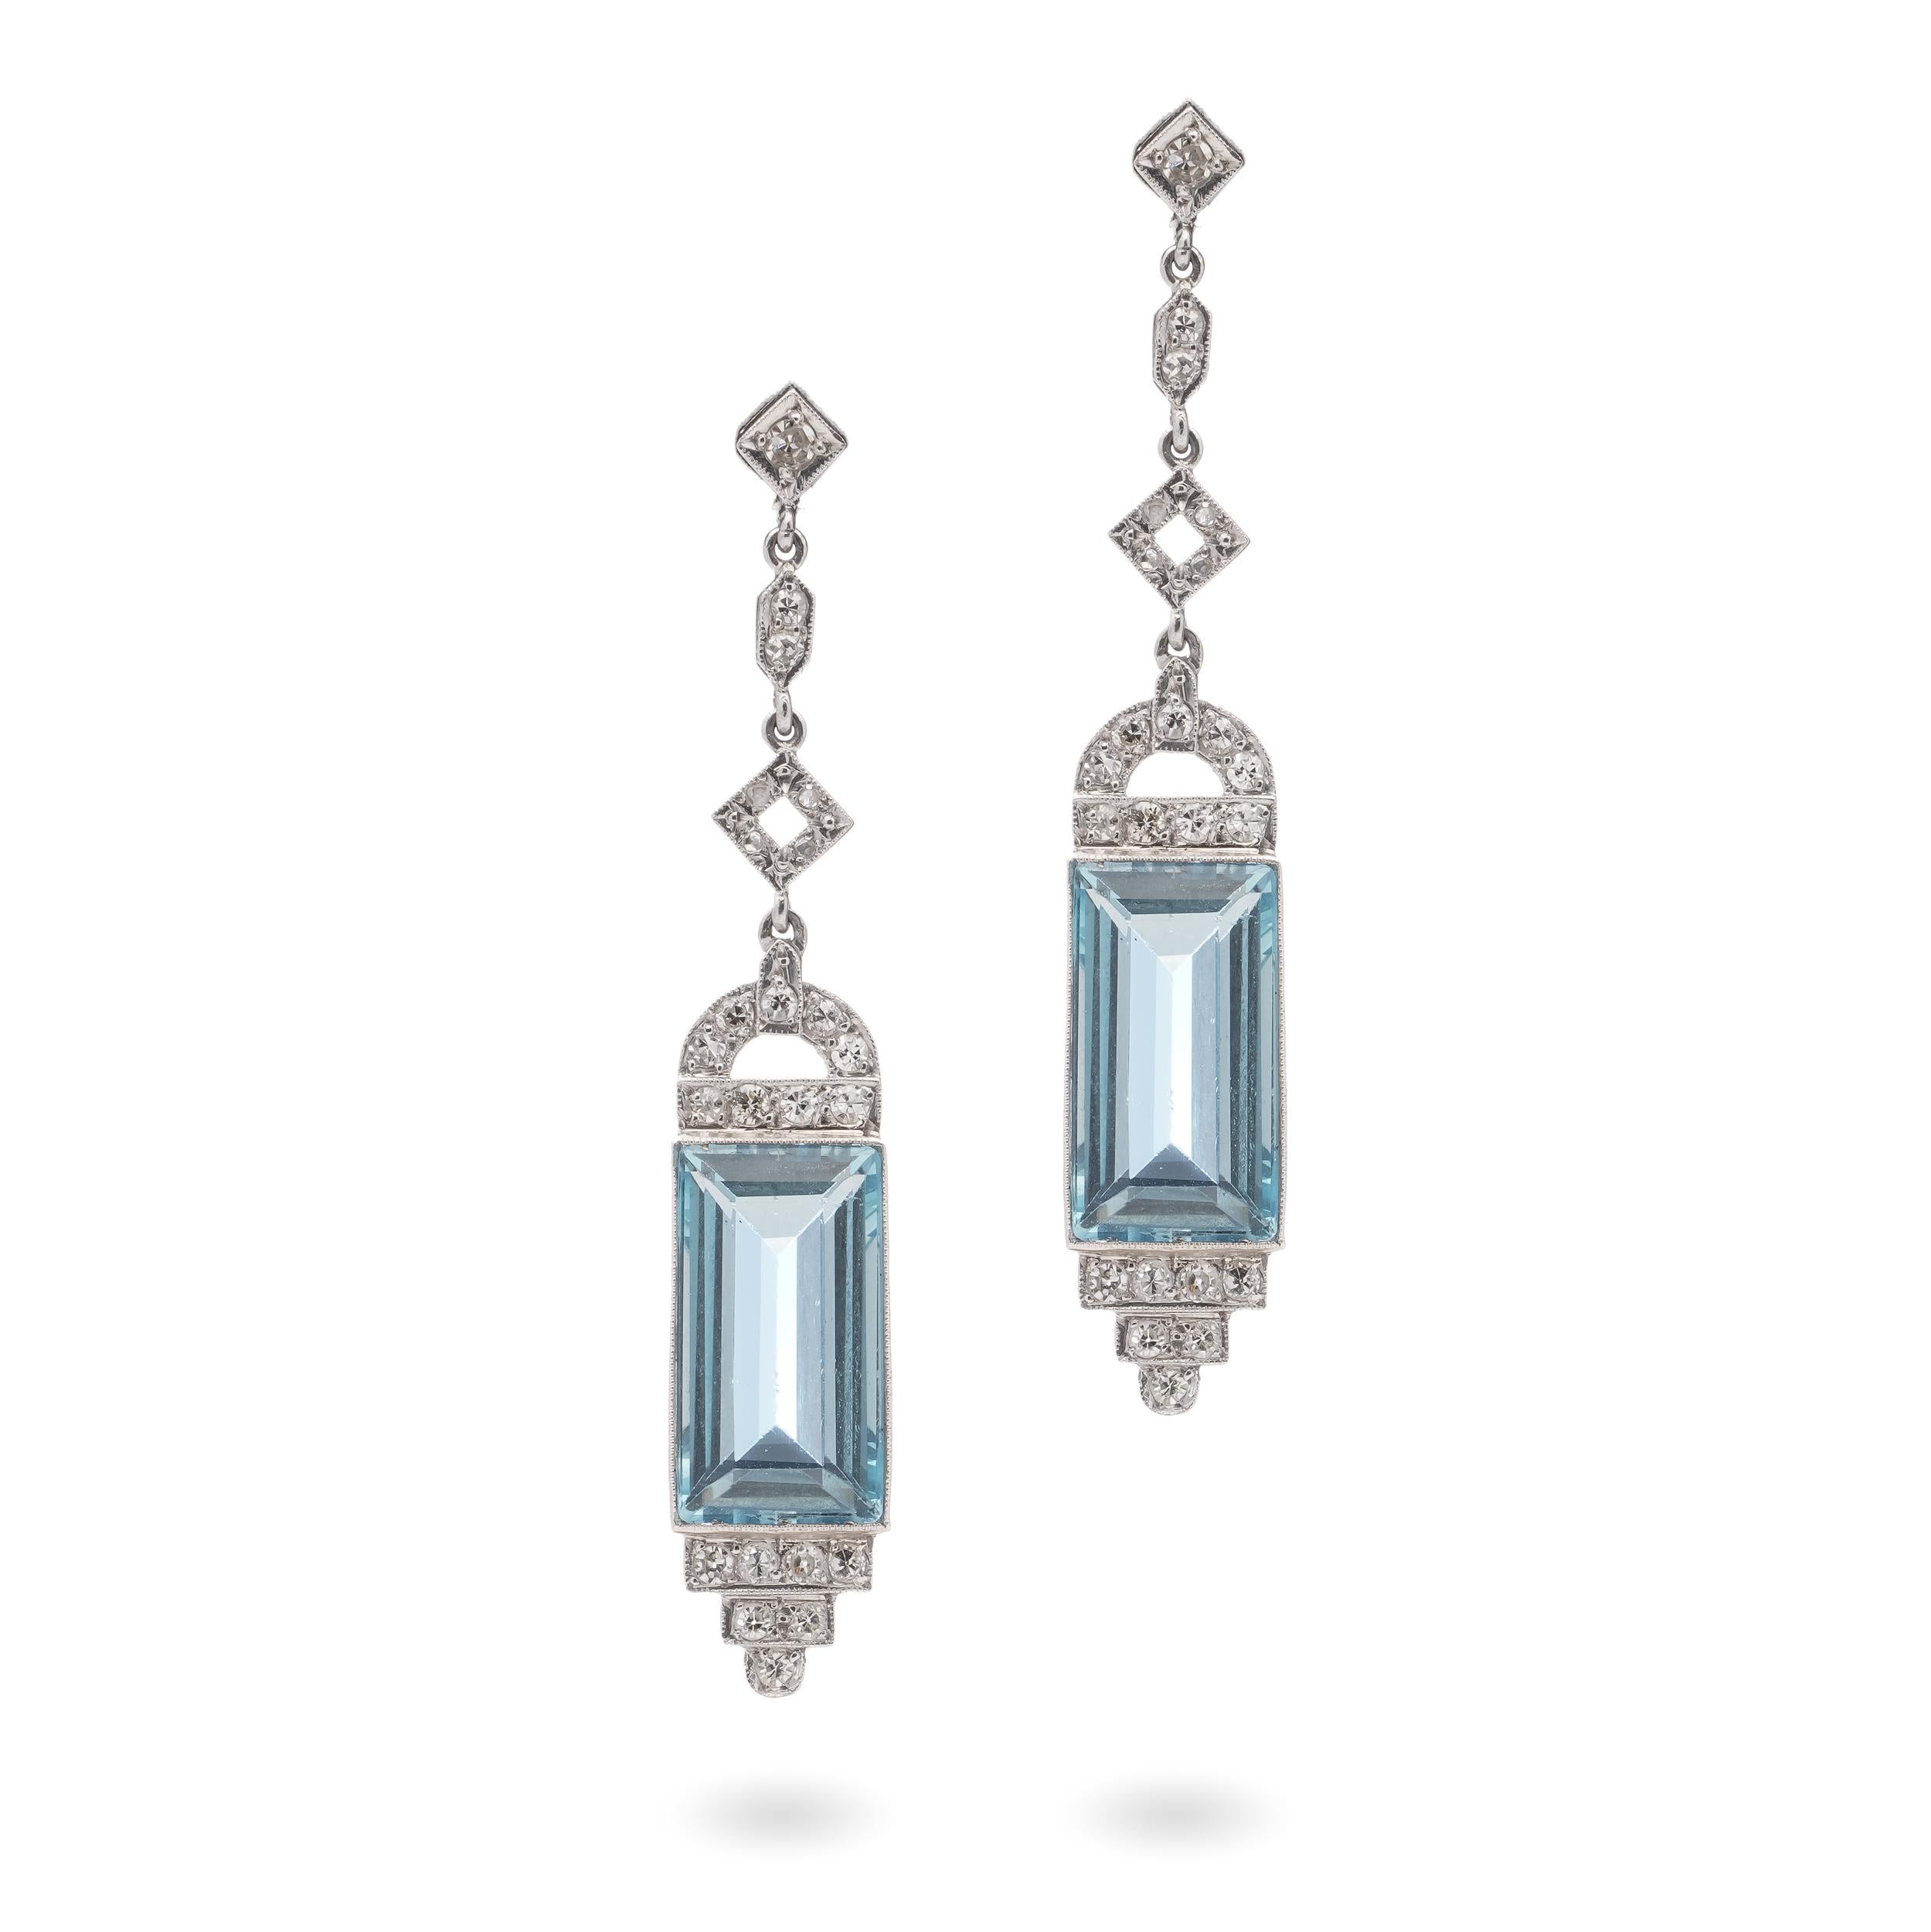 Art Deco 850. Platinum pair of A dangle earrings with Aquamarines and Diamonds.
Made in Europe, Ca. 1930's
X-Ray tested positive for 850. Platinum.

* Please note: customs and import charges may apply for international buyers, bidders are